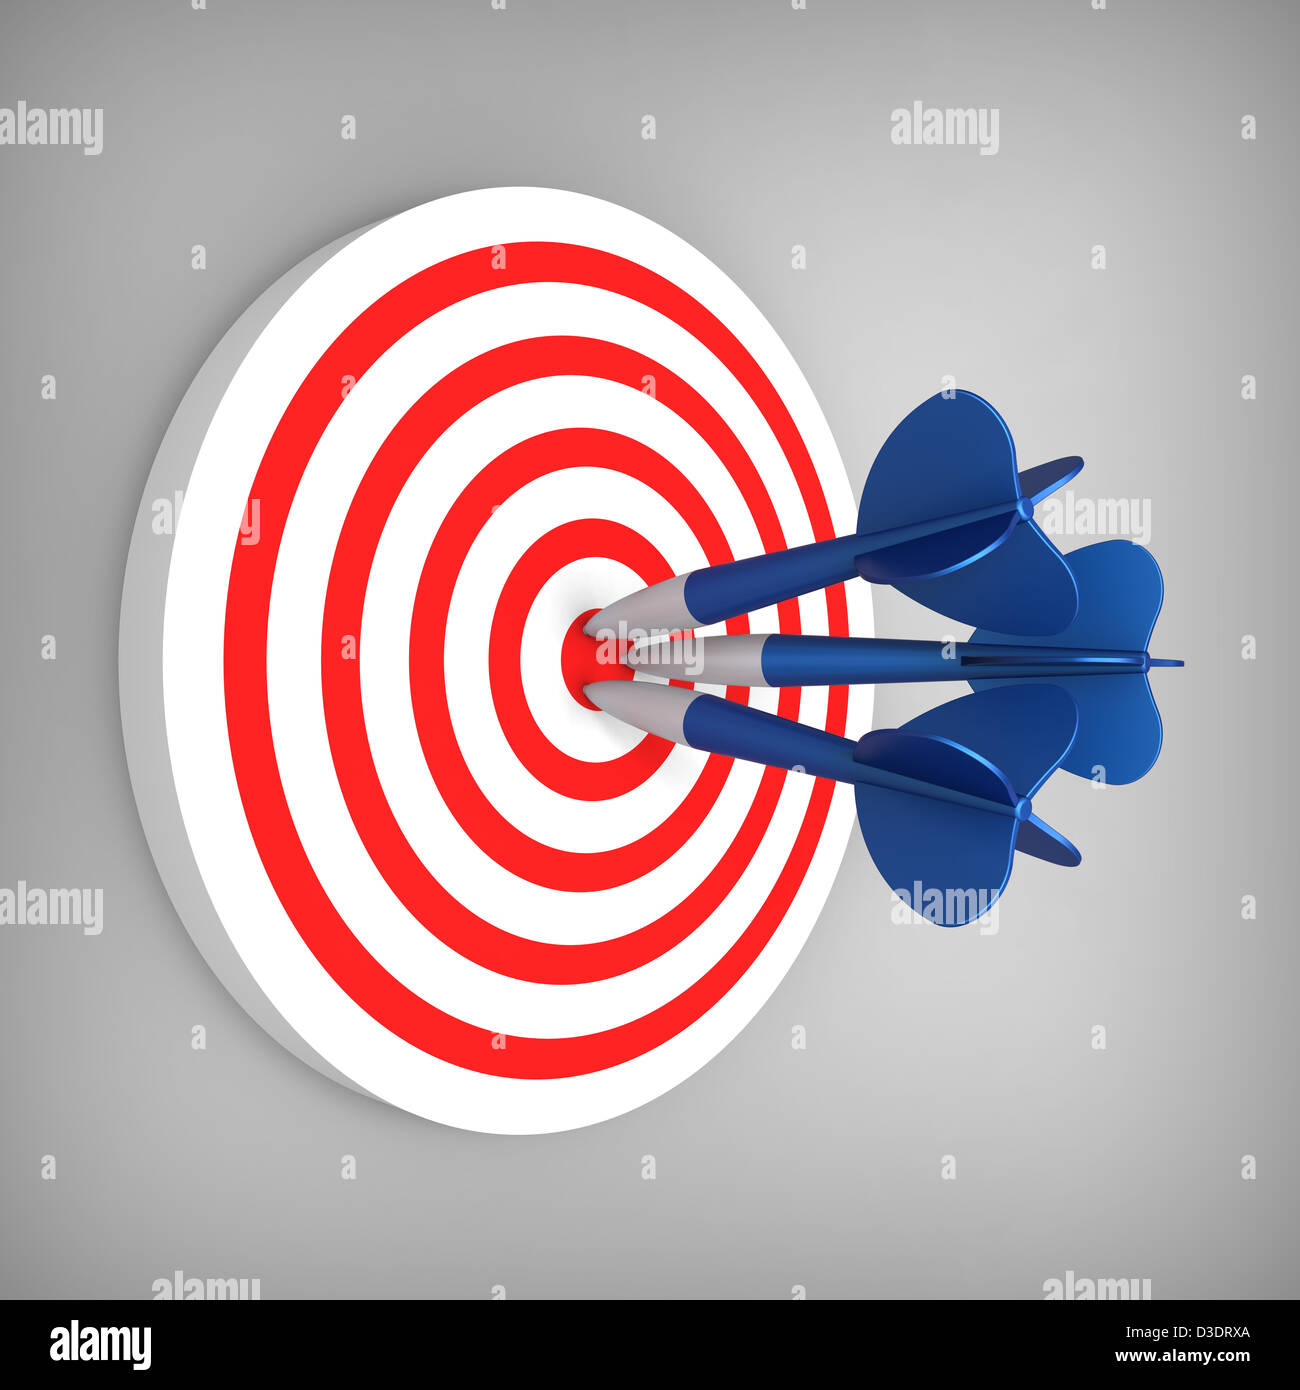 3D model of darts hit accurate on the red and white band target Stock Photo